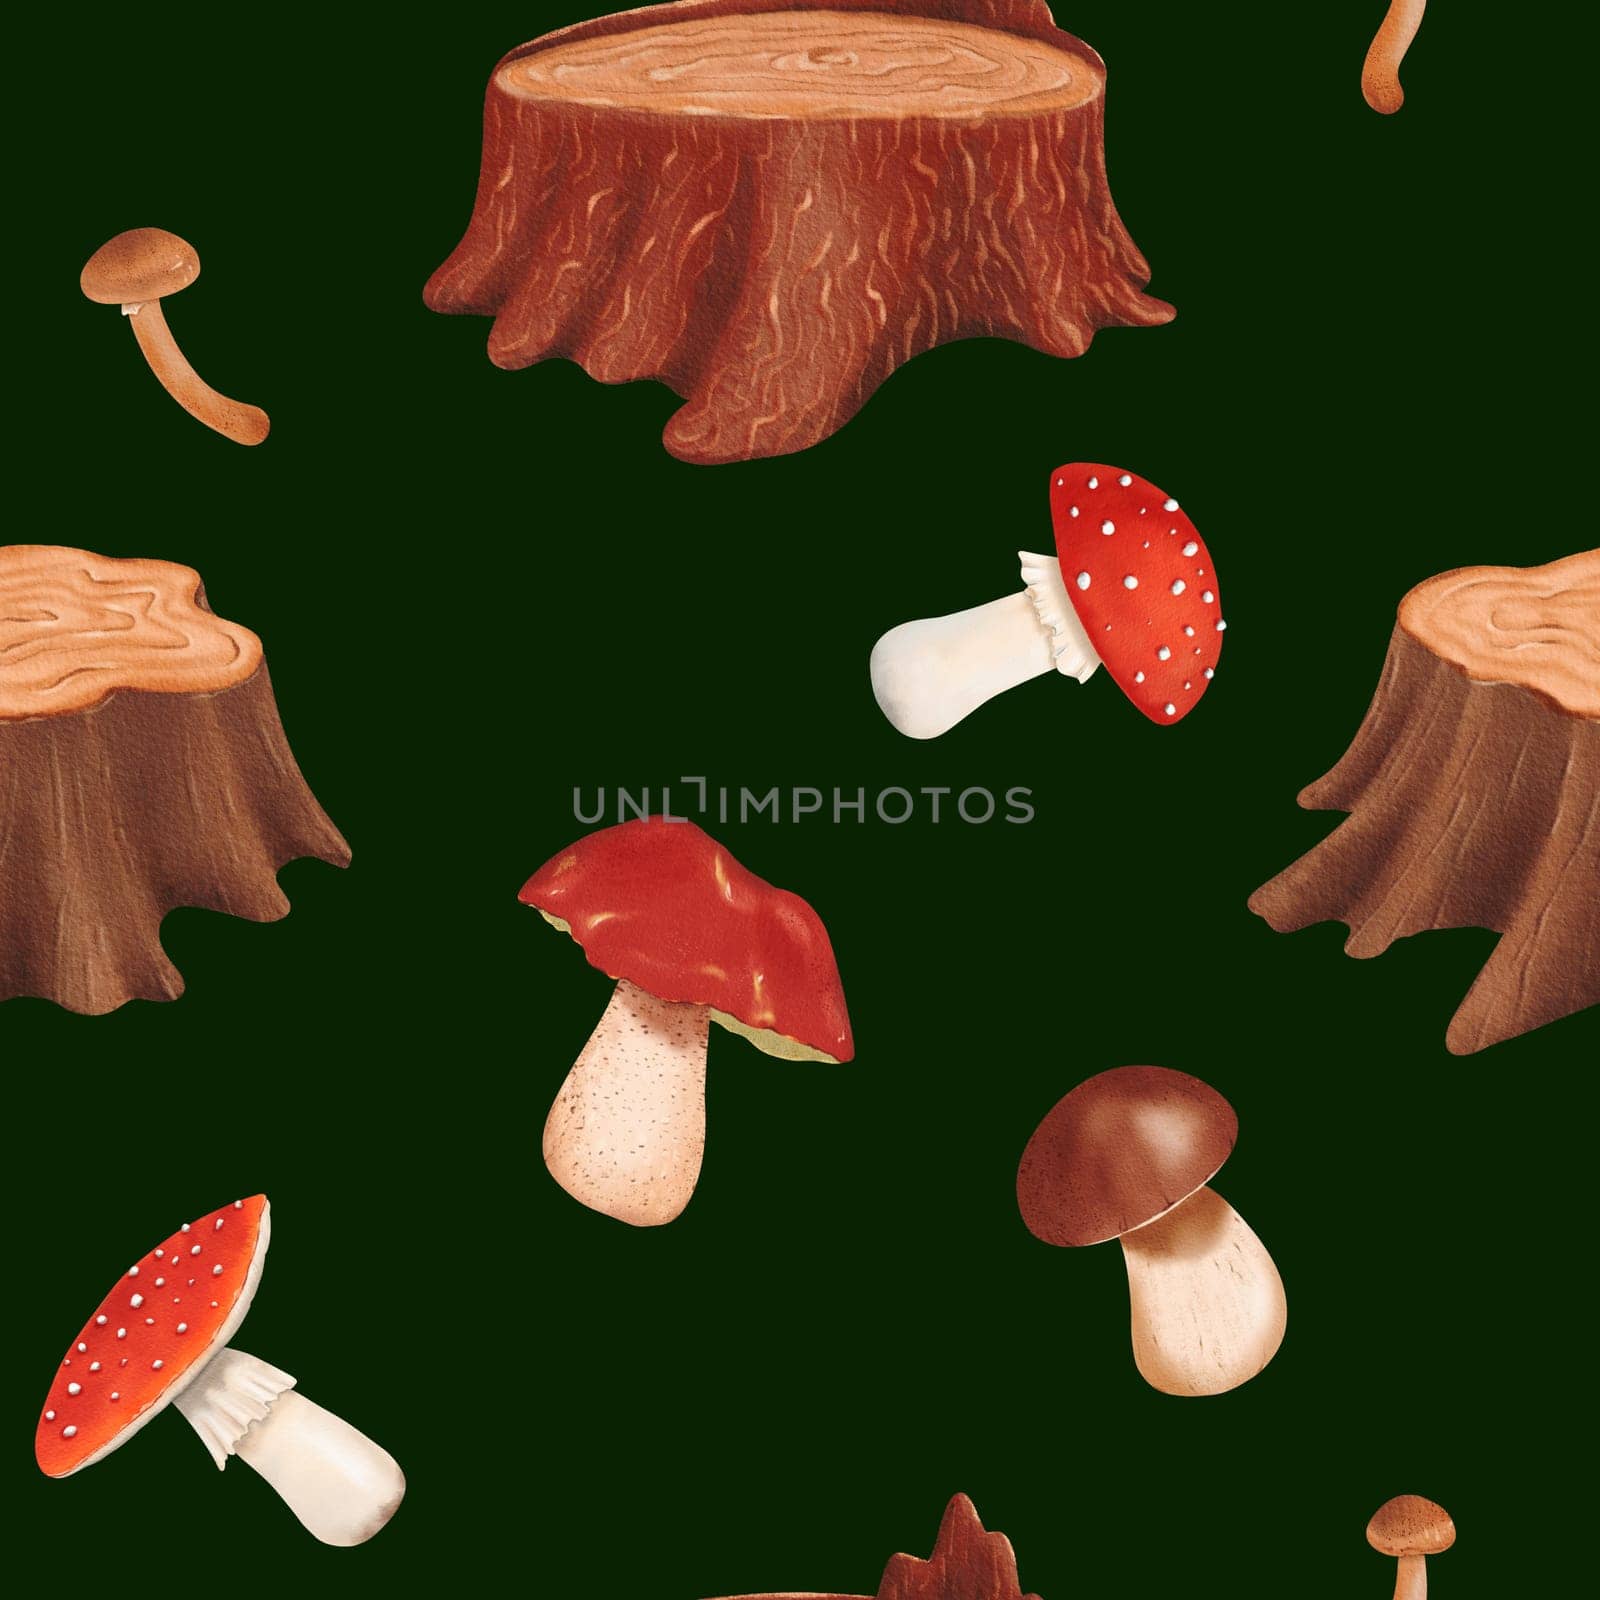 Woodland seamless pattern featuring aged textured tree stumps and various mushrooms. Edible penny bun and delicious porcini mushrooms. Dangerous poisonous fly agaric. Autumnal watercolor illustration.